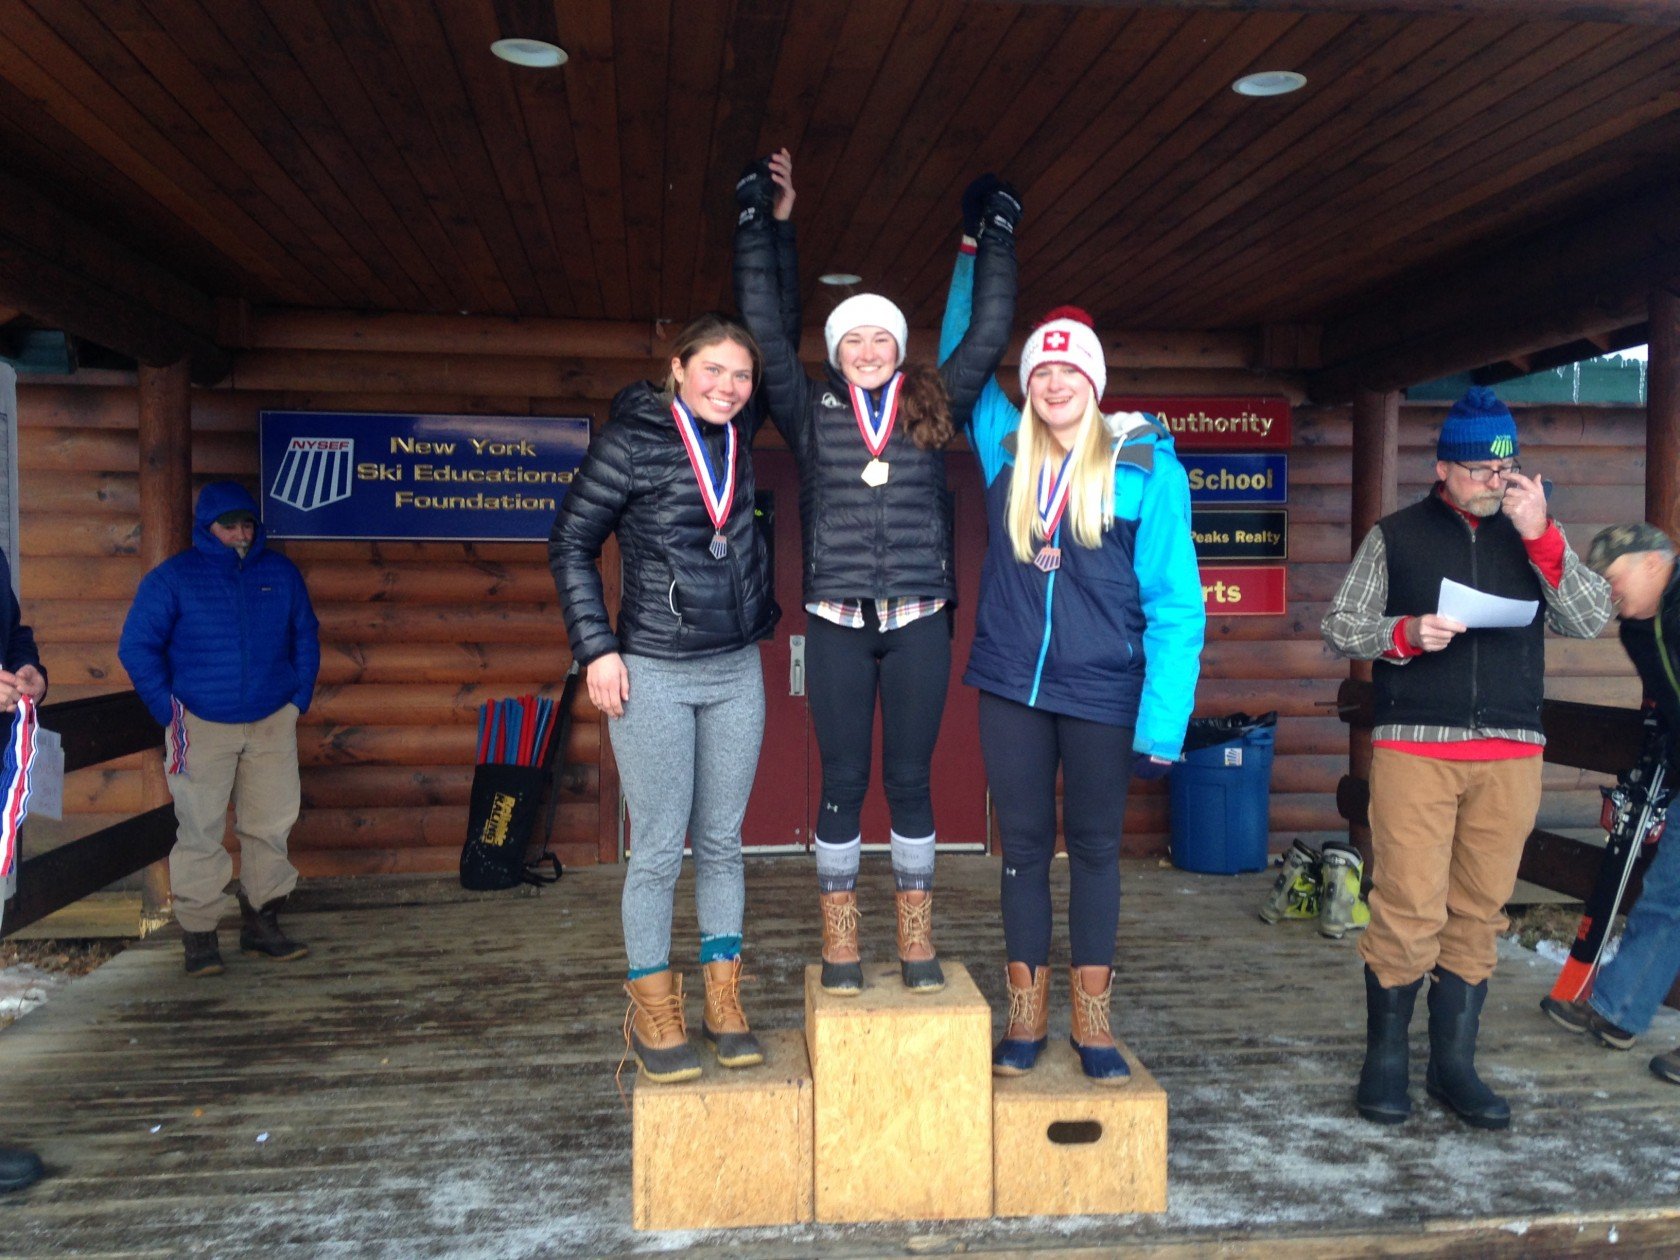 Ski racer Sarah Coombs on top of the podium at her first slalom race of the year at Gore Mountain. As a U16 she was first in SL and Overall.